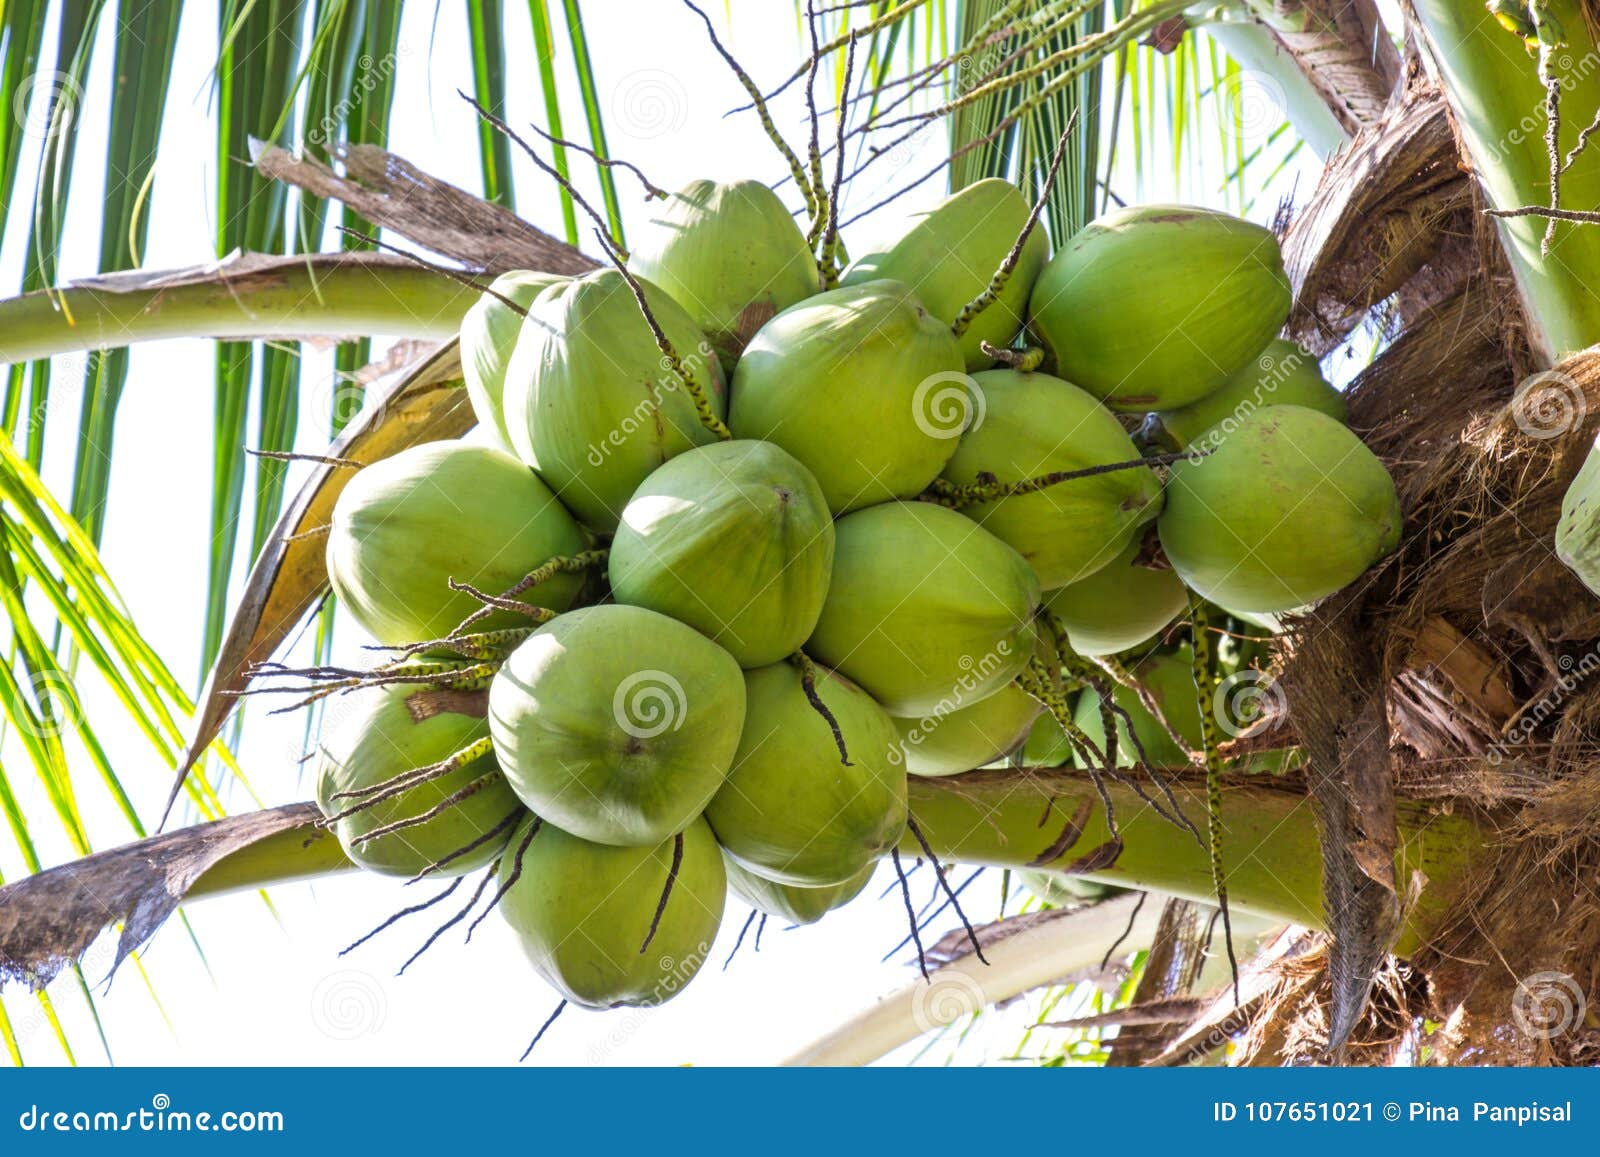 Fresh Green Coconut on a Tree in My Garden Stock Image - Image of ...